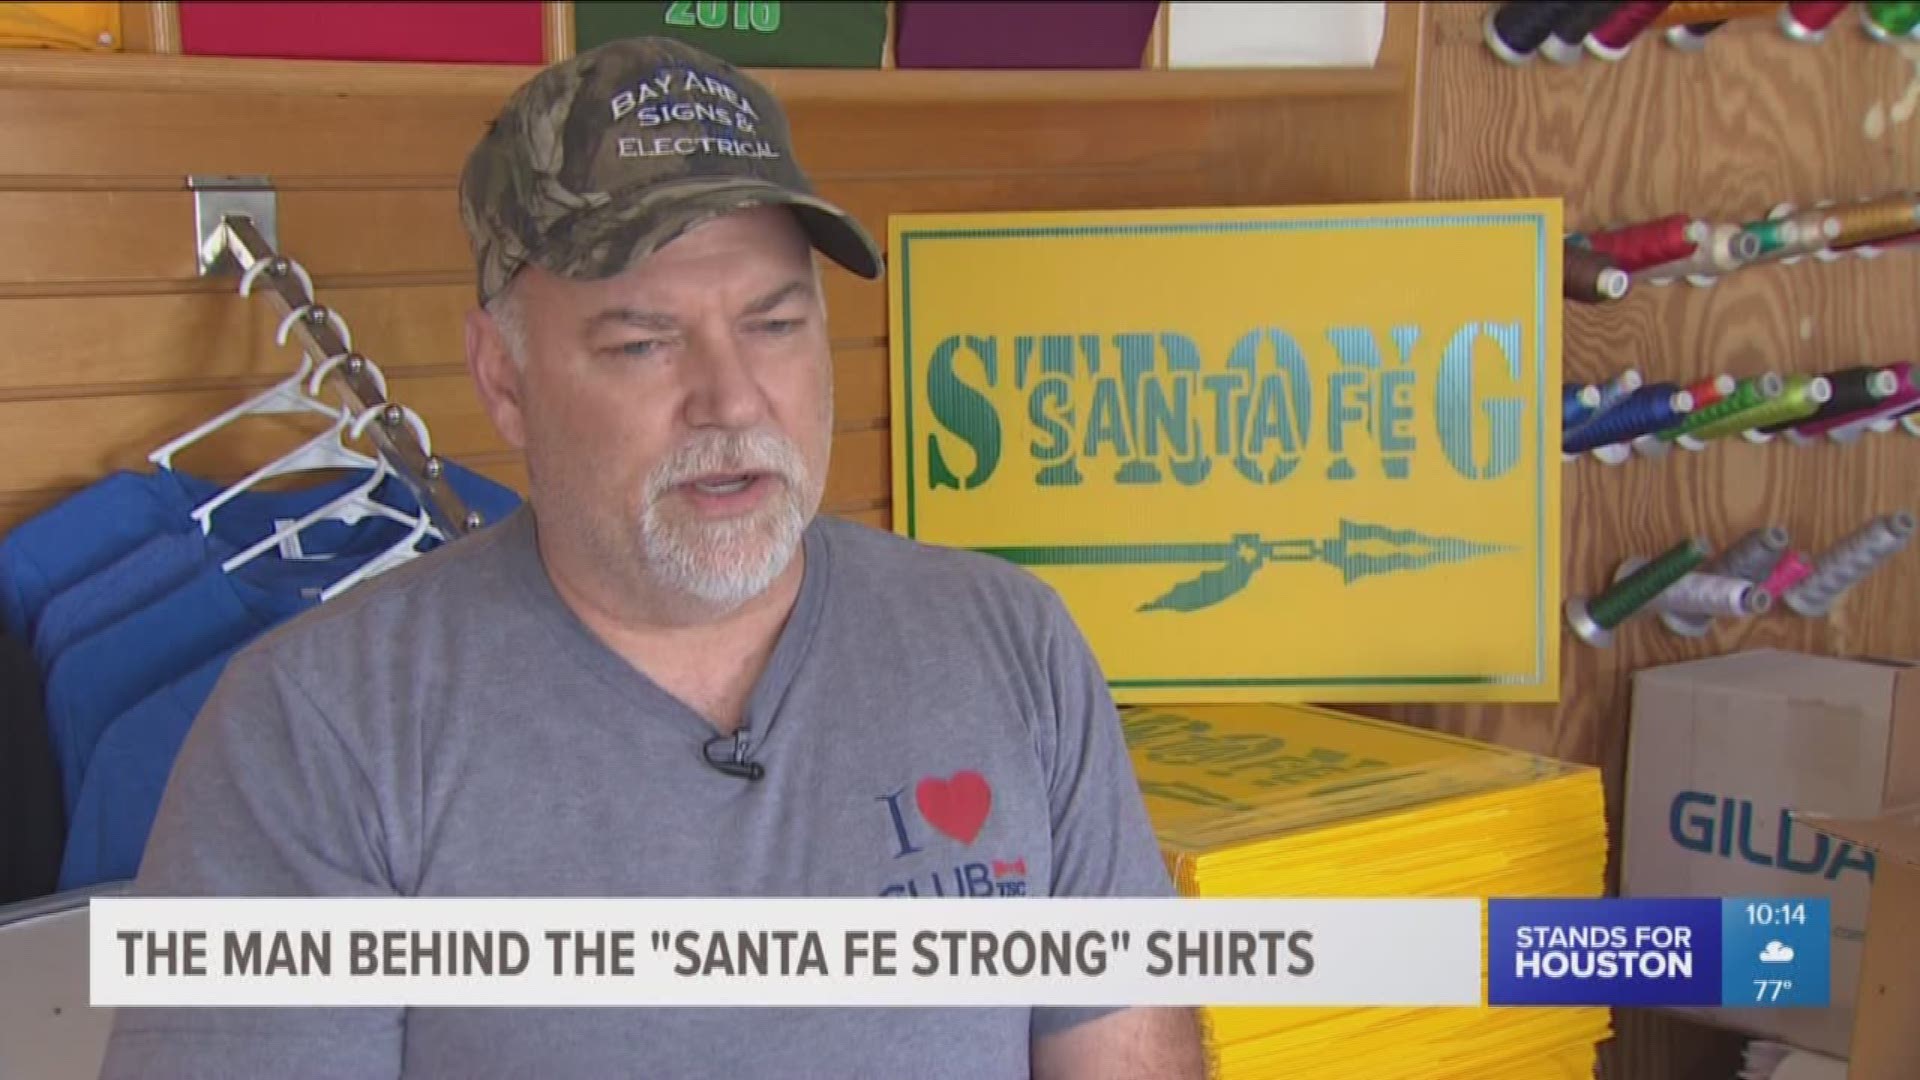 Santa Fe resident and Patriot T's T-shirt shop owner Earnest Roberts created the slogan and design of the "Santa Fe Strong" shirts.